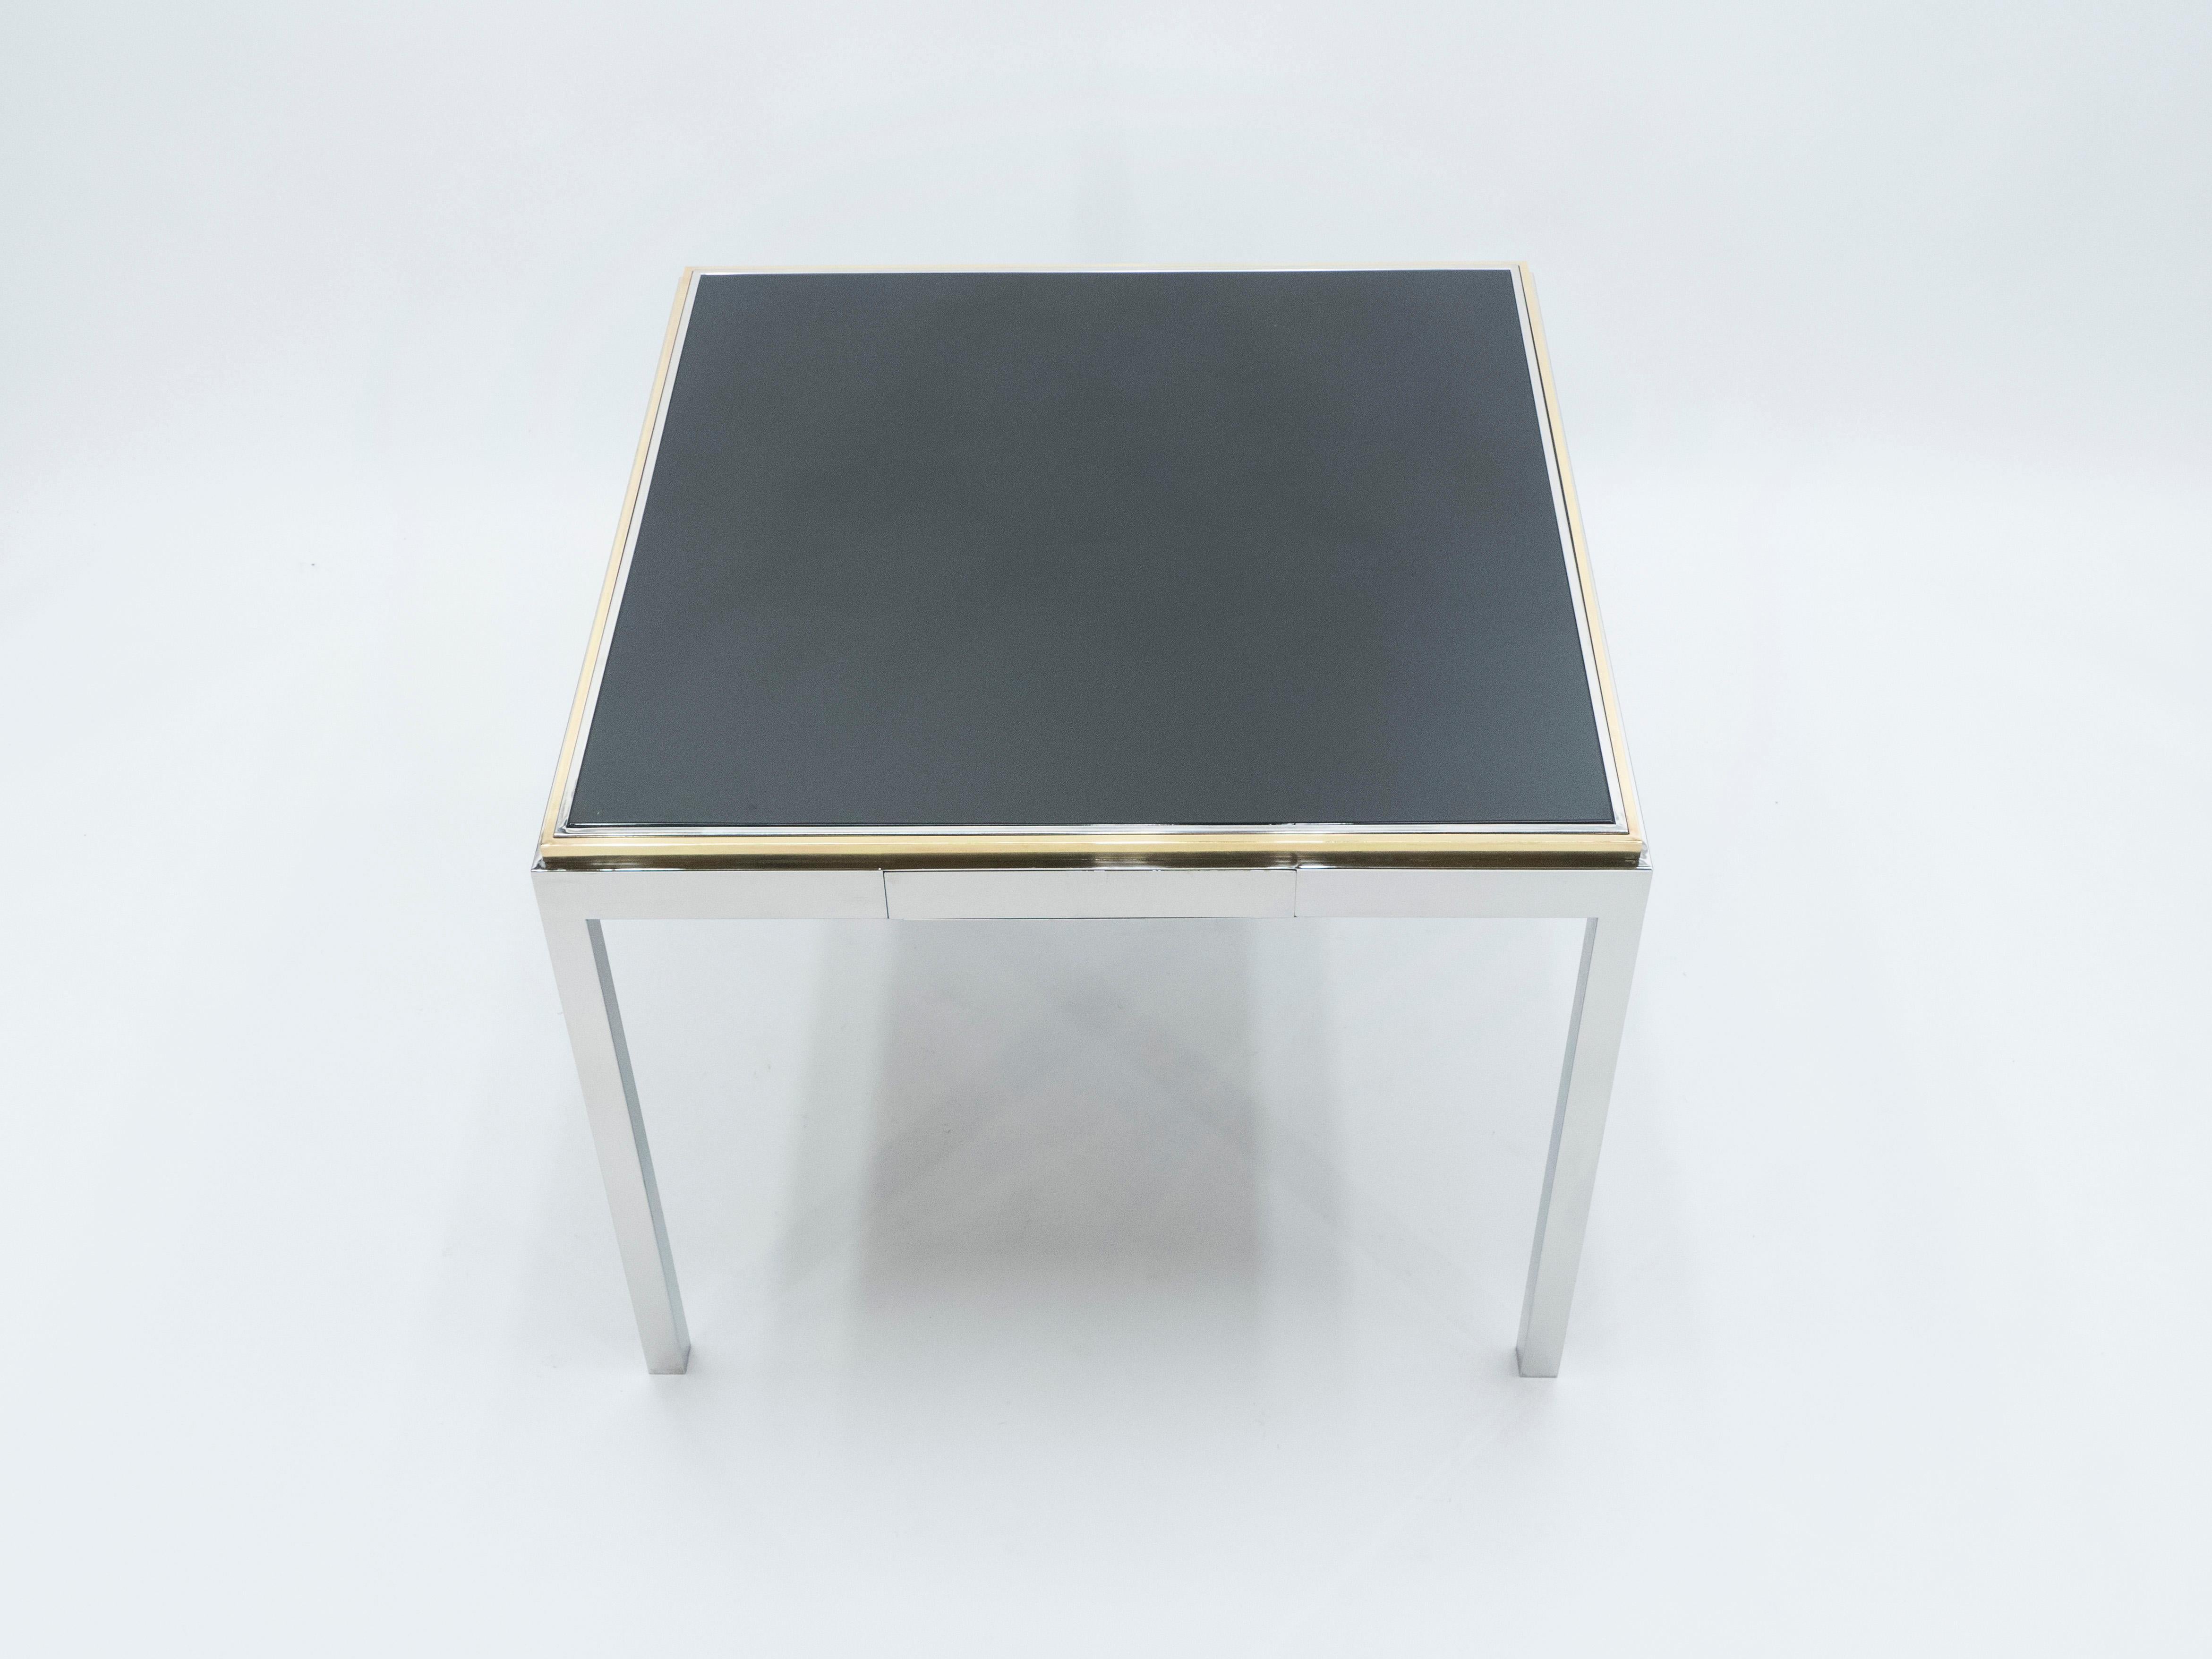 A rare Flaminia game table by Willy Rizzo, it has a double sided surface, one side is a shining black lacquered top, the other side is brown Suede leather as a playing surface. Following the glamorous Italian midcentury look of other Classic Willy